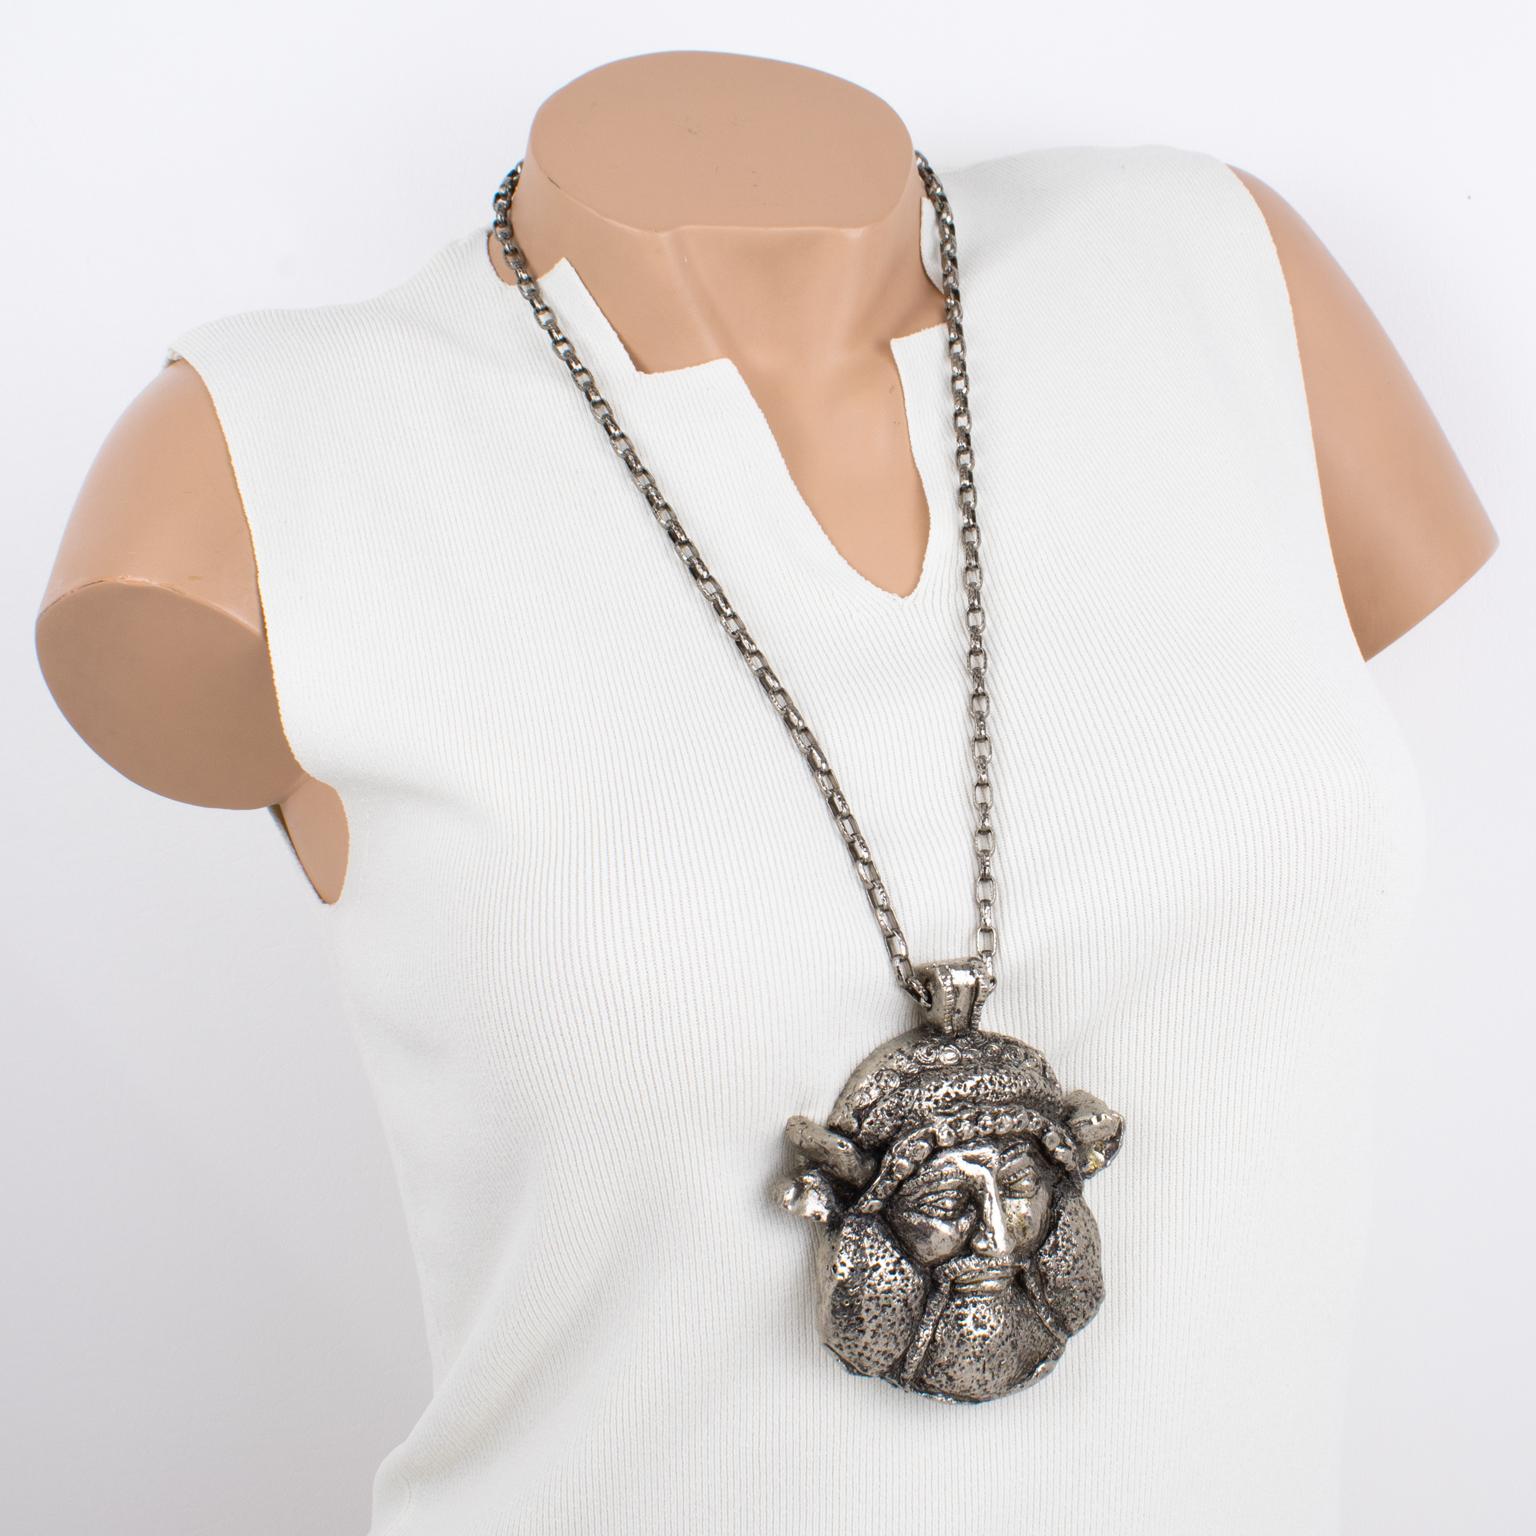 This stunning Guy Laroche Paris signed pendant necklace features an extra-long silvered metal textured chain with a massive dimensional pendant. The medallion boasts an antique Viking god face in silvered metal-coated resin. The engraved signature